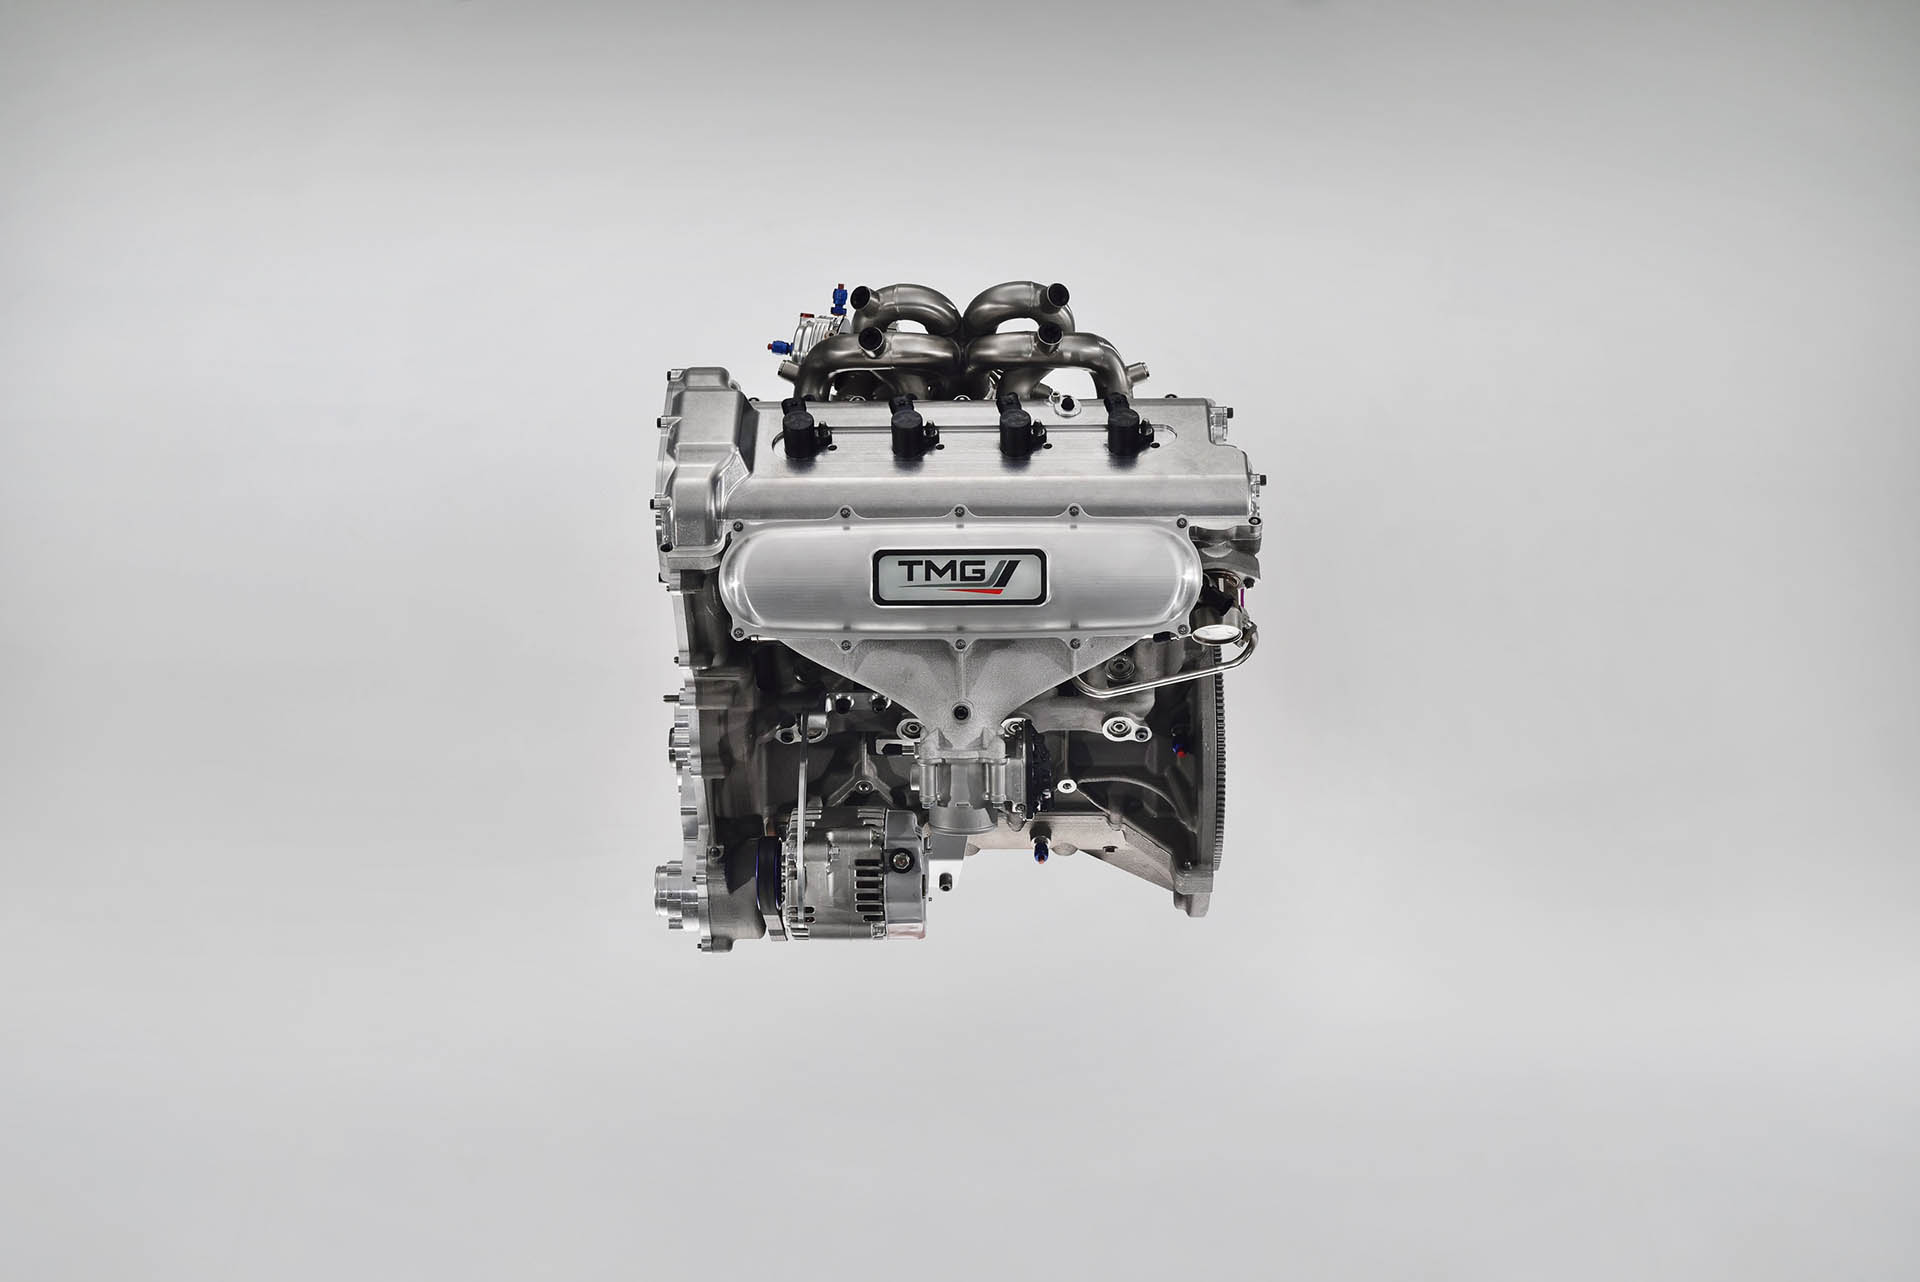 1.6-liter direct-injection turbo Global Race Engine